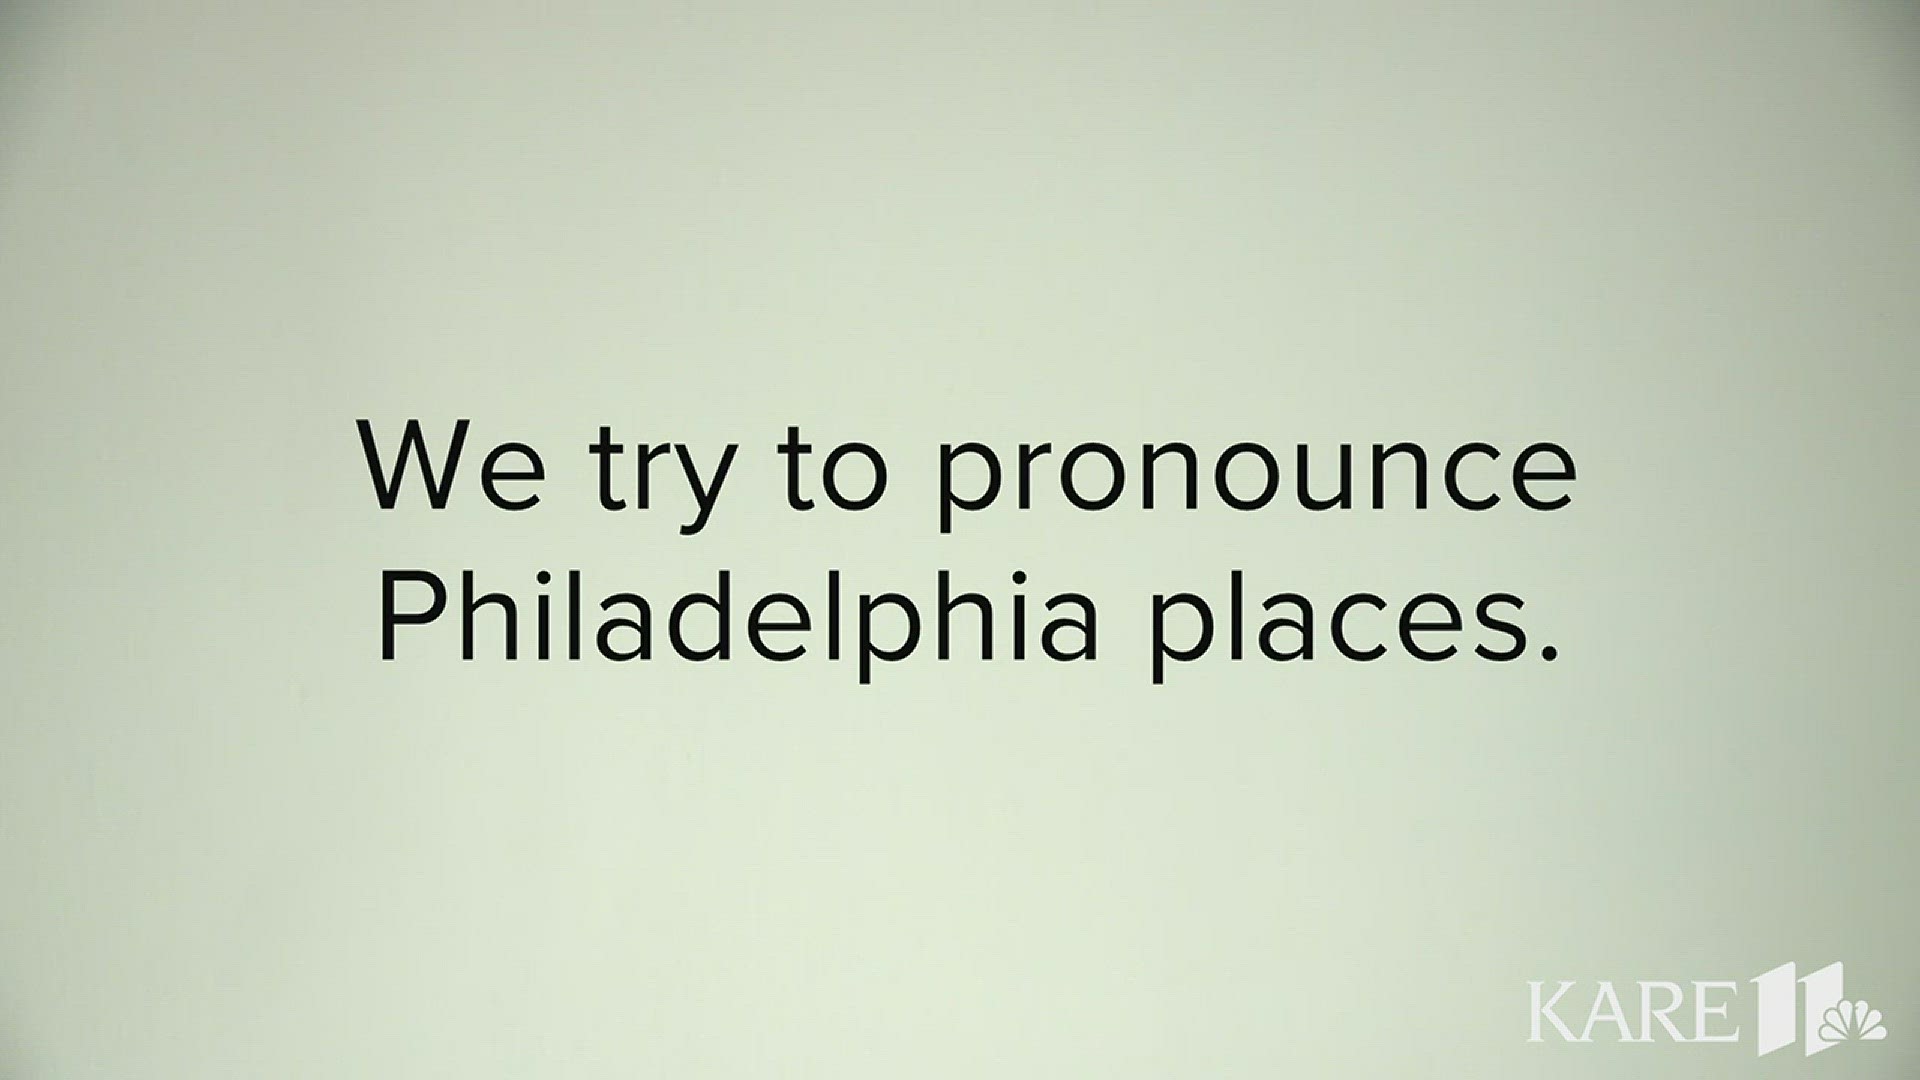 Watch as the KARE 11 staff tries to pronounce the names of different Philadelphia neighborhoods and landmarks.  http://kare11.tv/2Dq4ixn